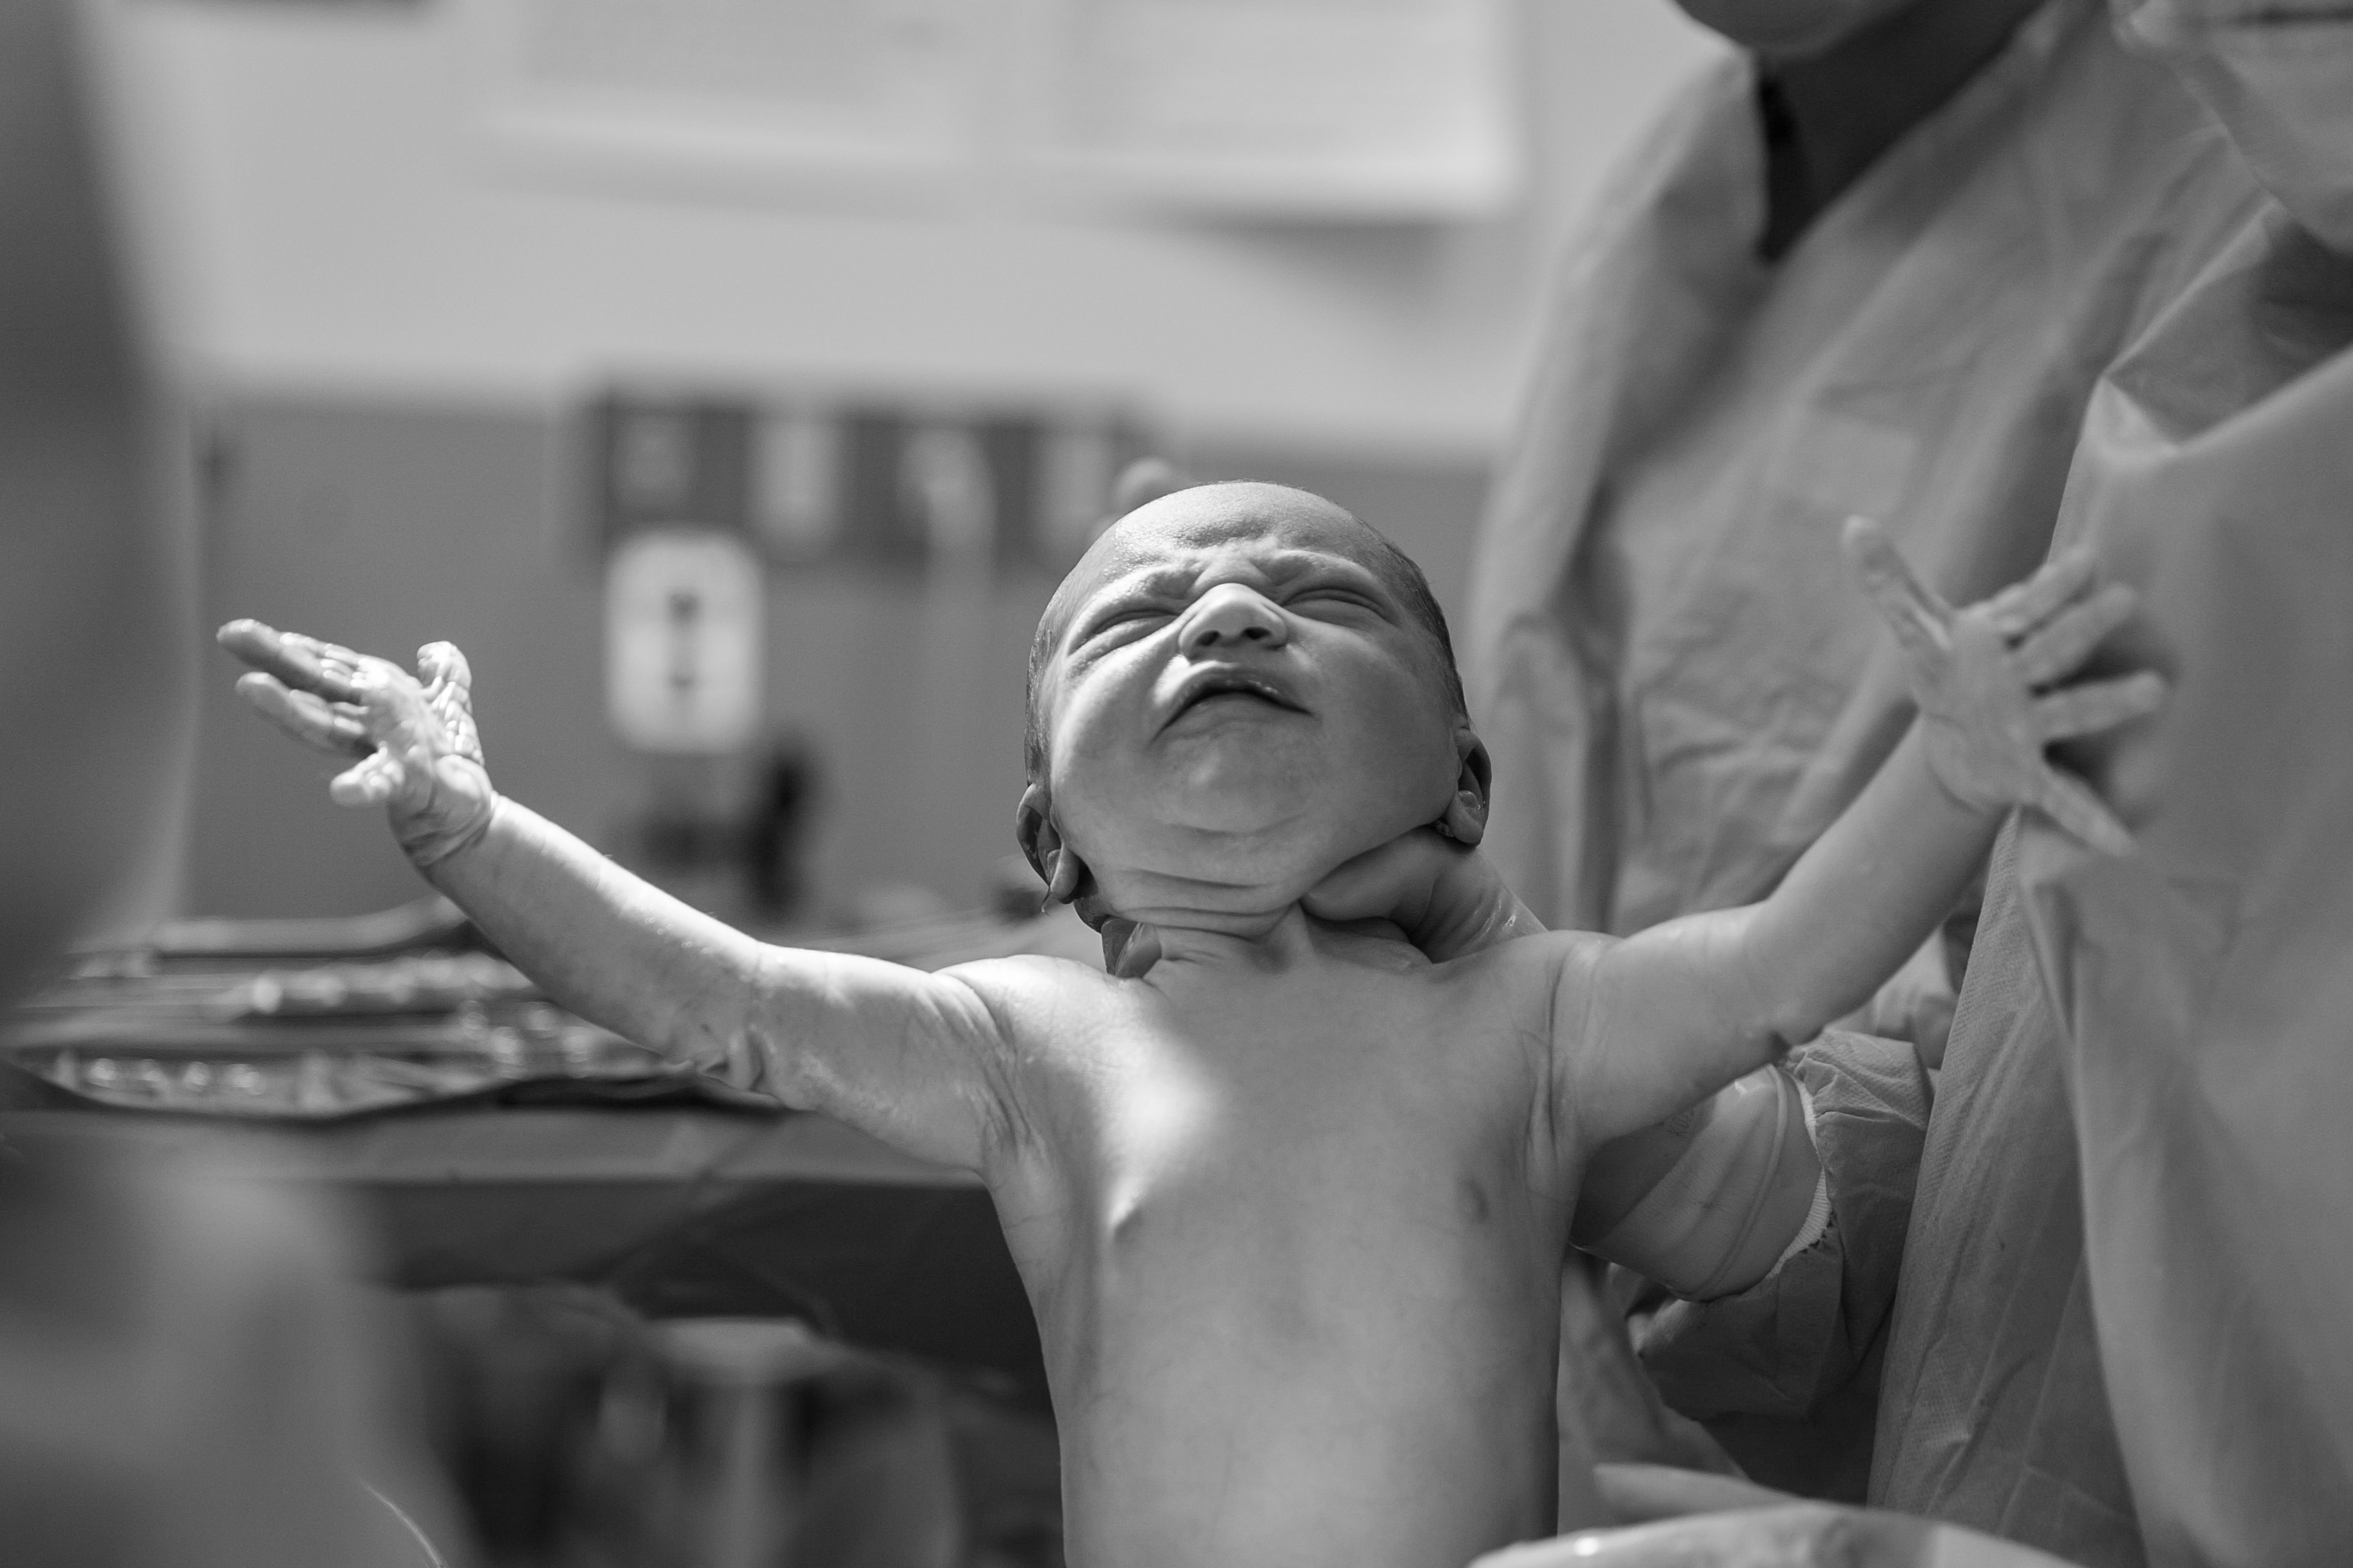 black & white image of a baby just being born, who is being held up by health care providers. Photo by Alex Hockett on Unsplash.